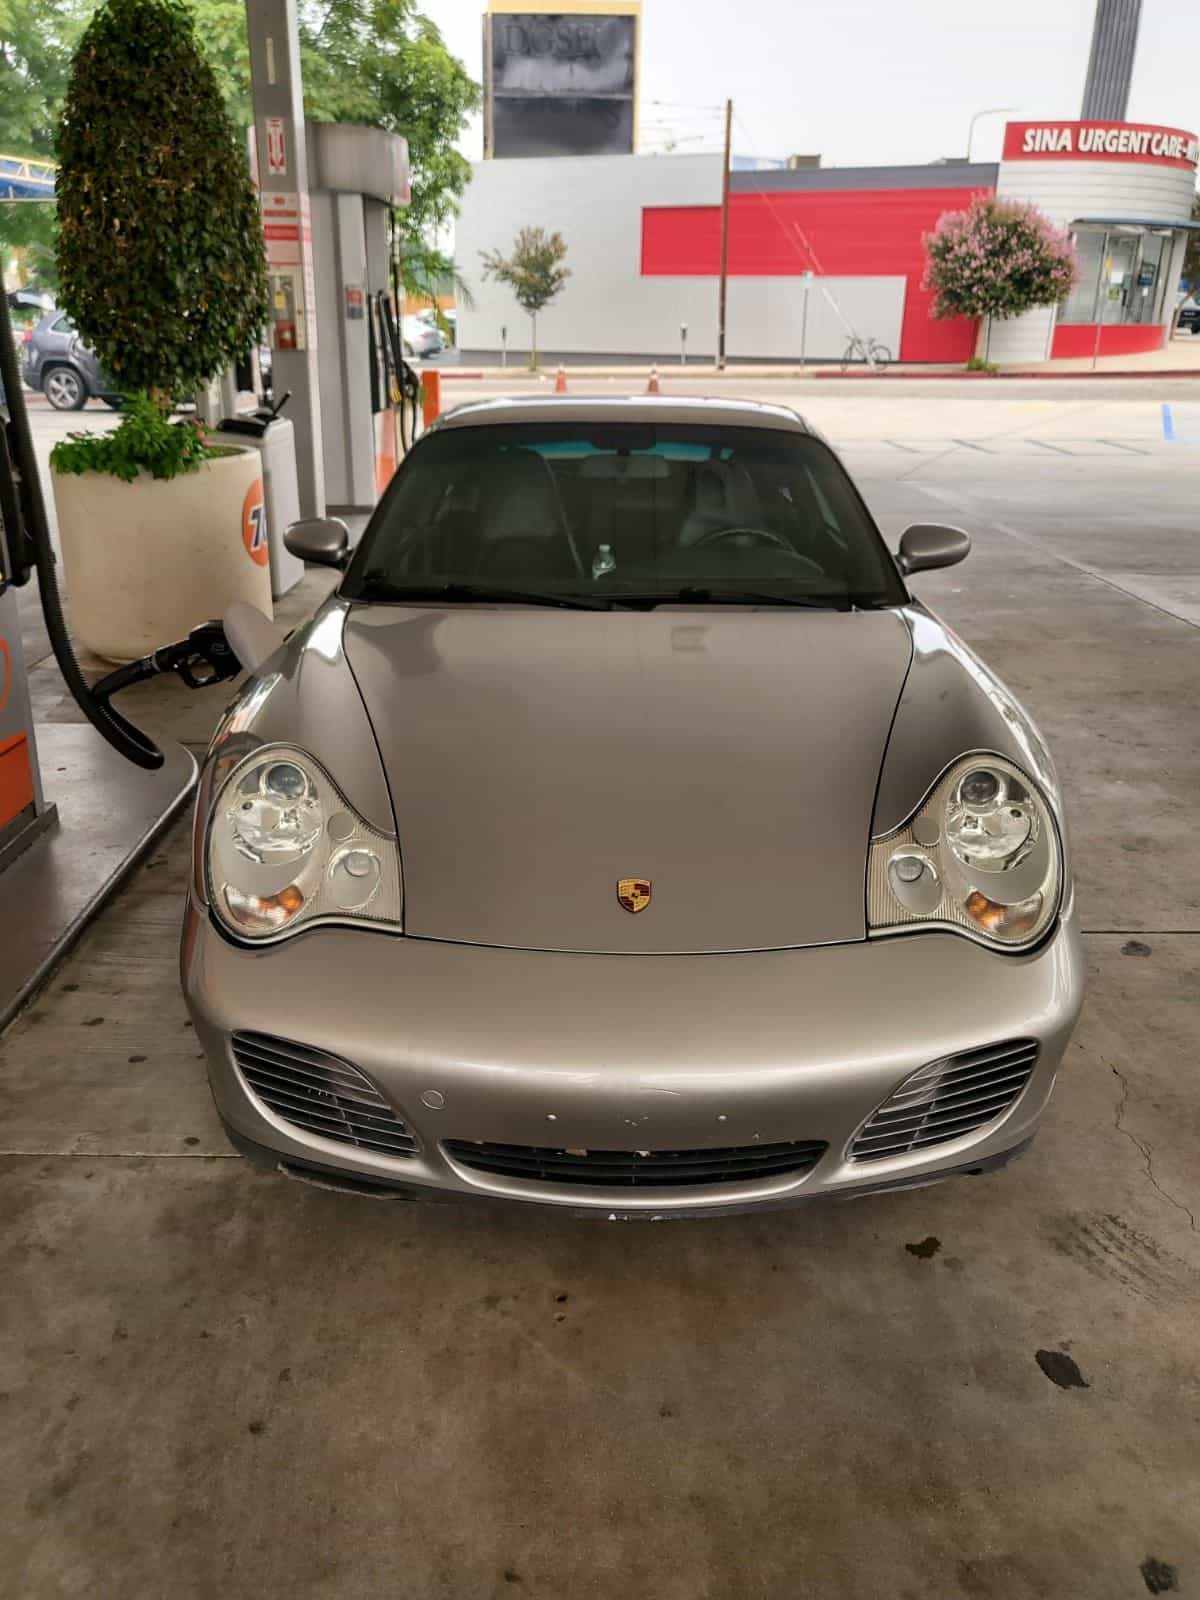 2004 Porsche 911 - 2004 Porsche 911 40th Anniversary - Used - VIN WP0AA29944S621864 - 66,500 Miles - 6 cyl - 2WD - Manual - Coupe - Silver - North Hollywood, CA 91605, United States